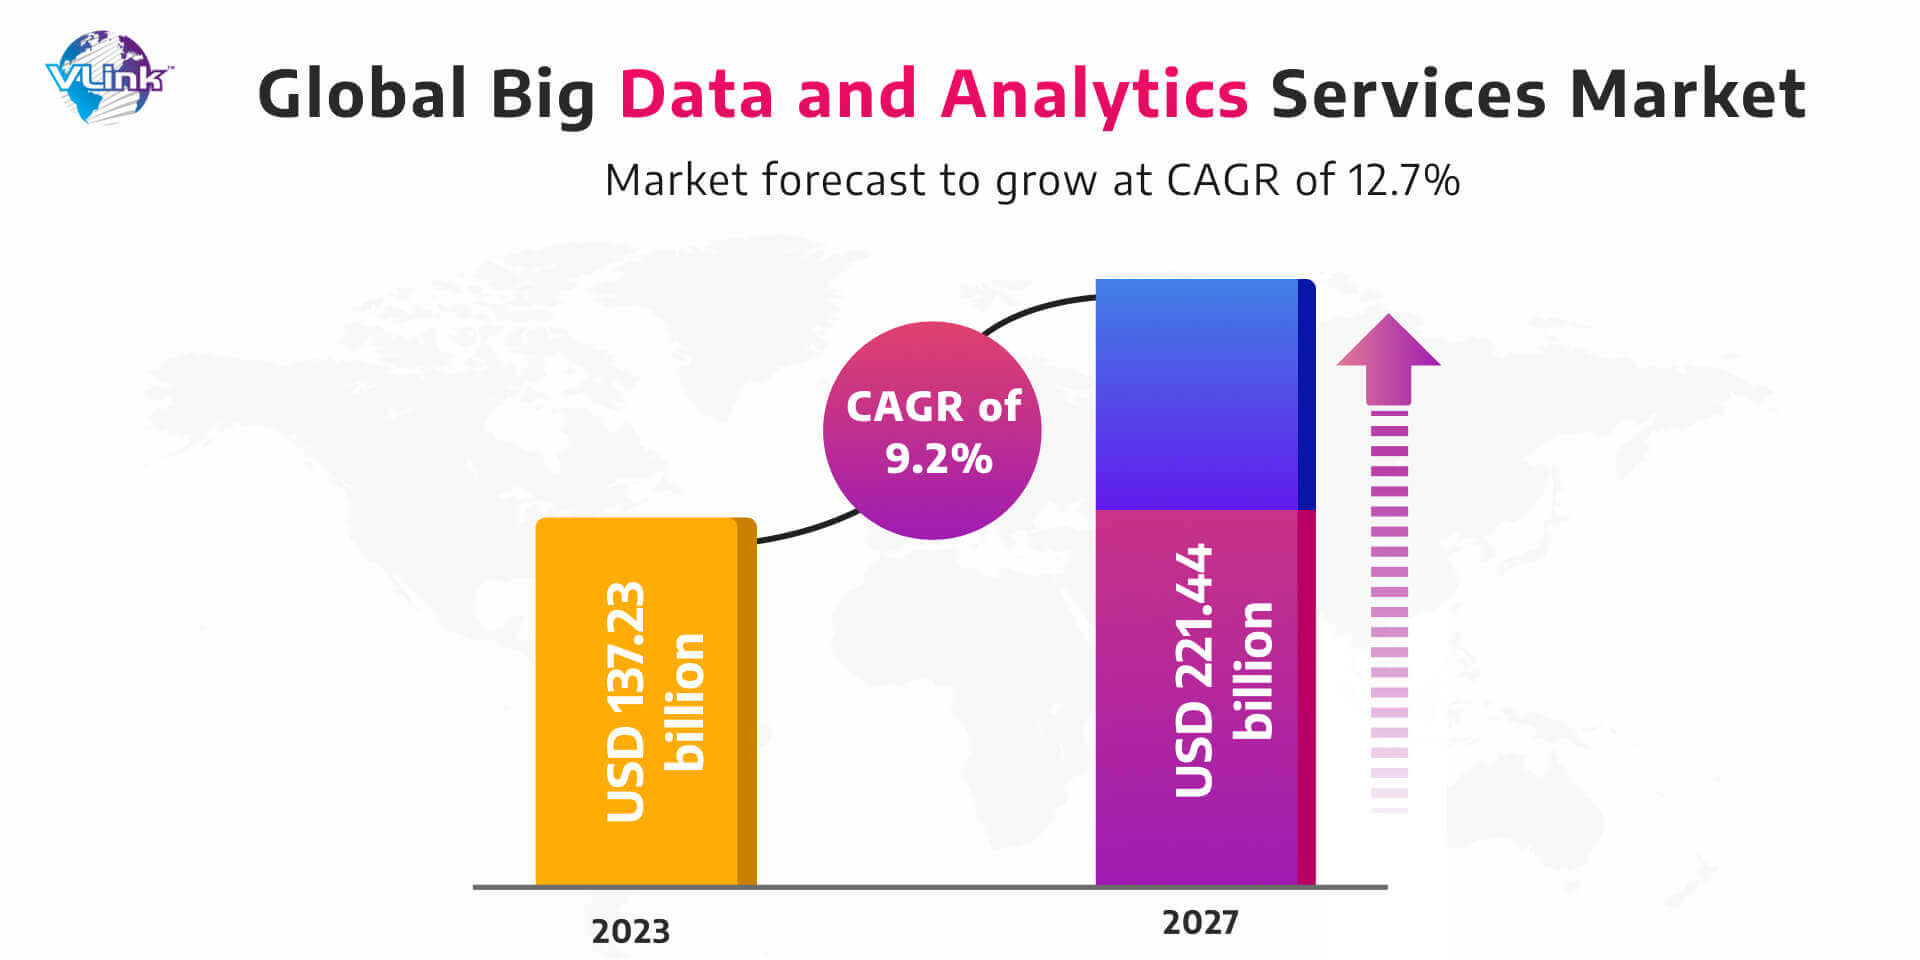 The global big data and analytics services market